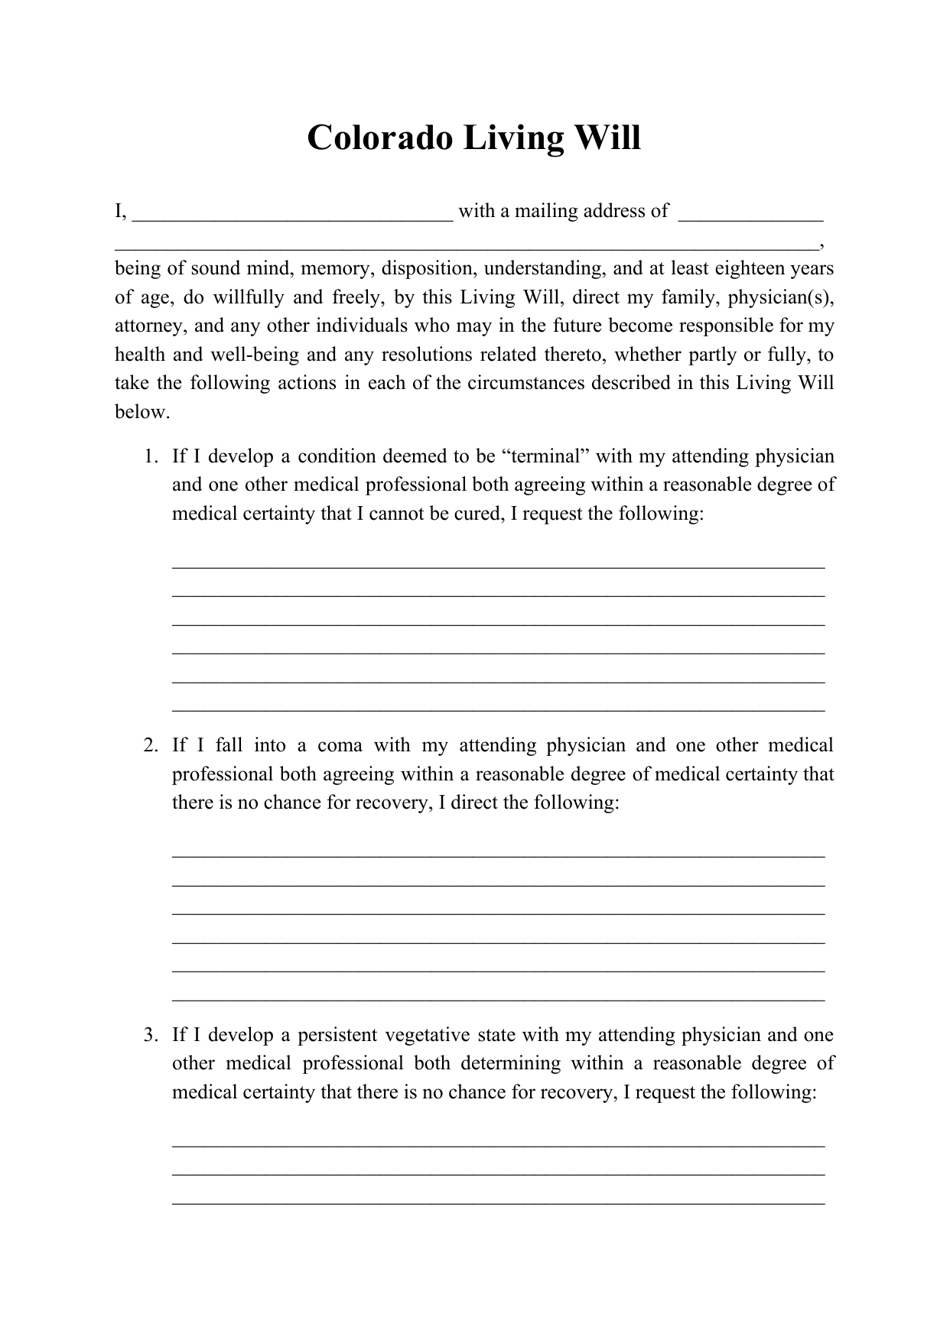 Colorado Living Will Form Fill Out Sign Online and Download PDF